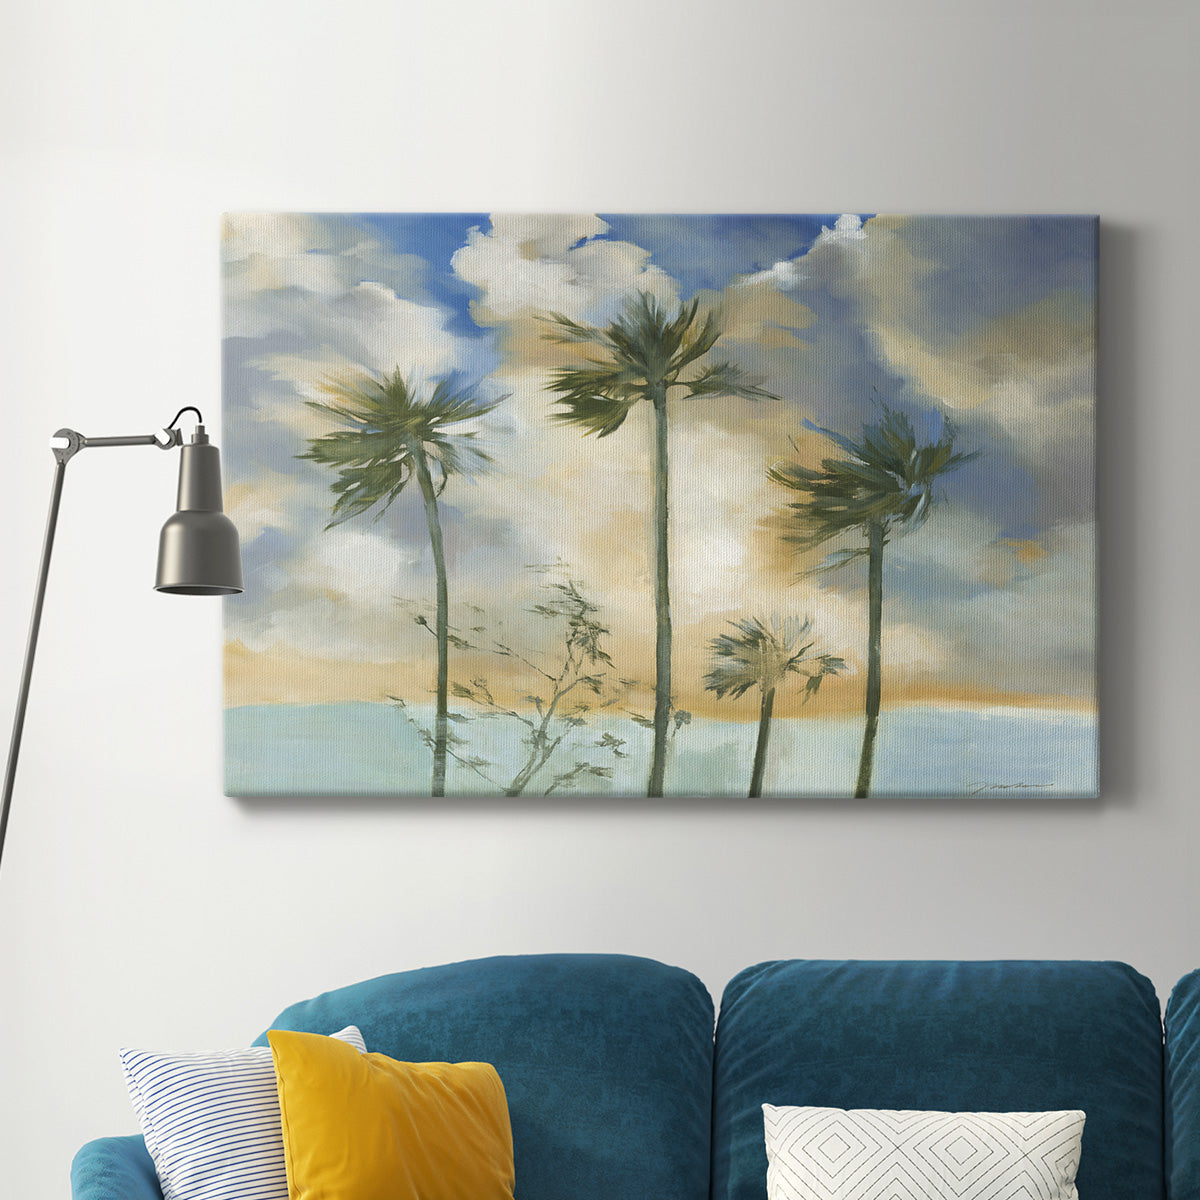 Palms in the Wind Premium Gallery Wrapped Canvas - Ready to Hang